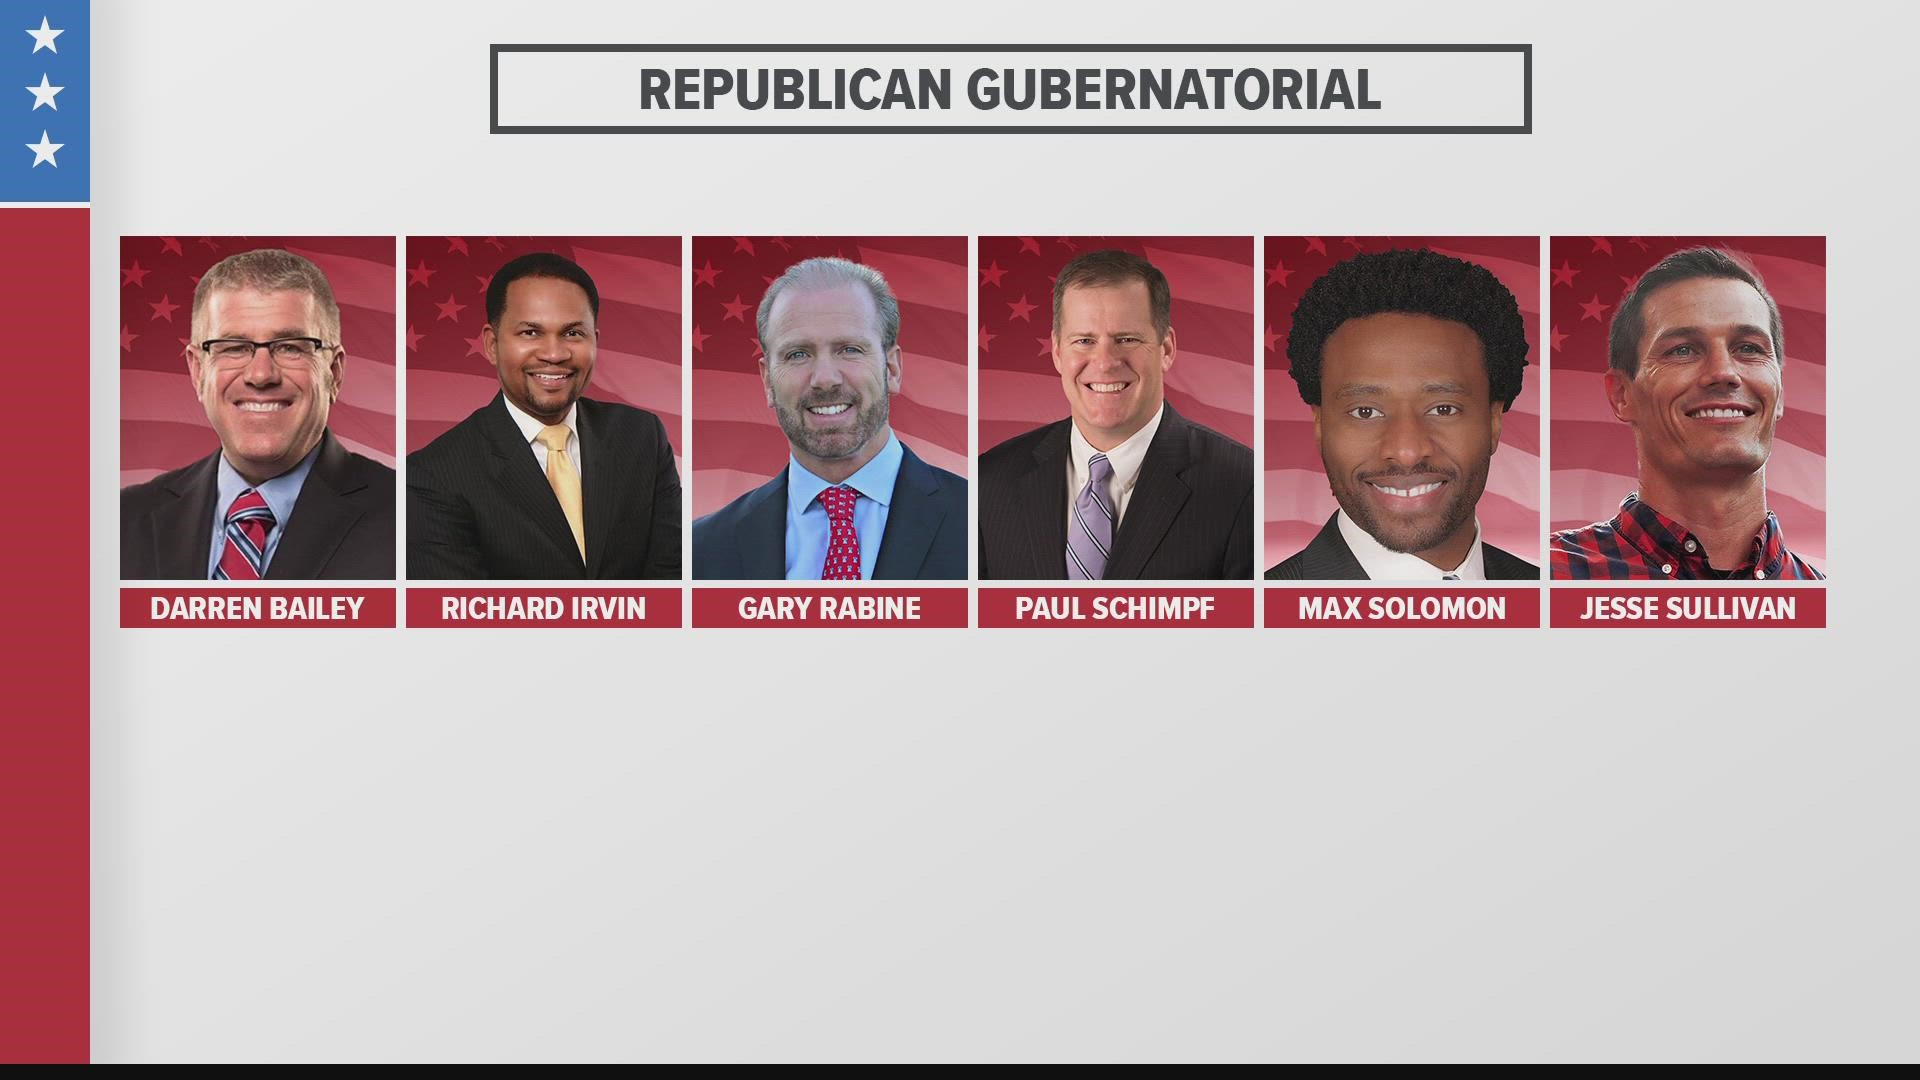 There are six candidates vying for the Republican spot on the ticket against Governor J.B. Pritzker.